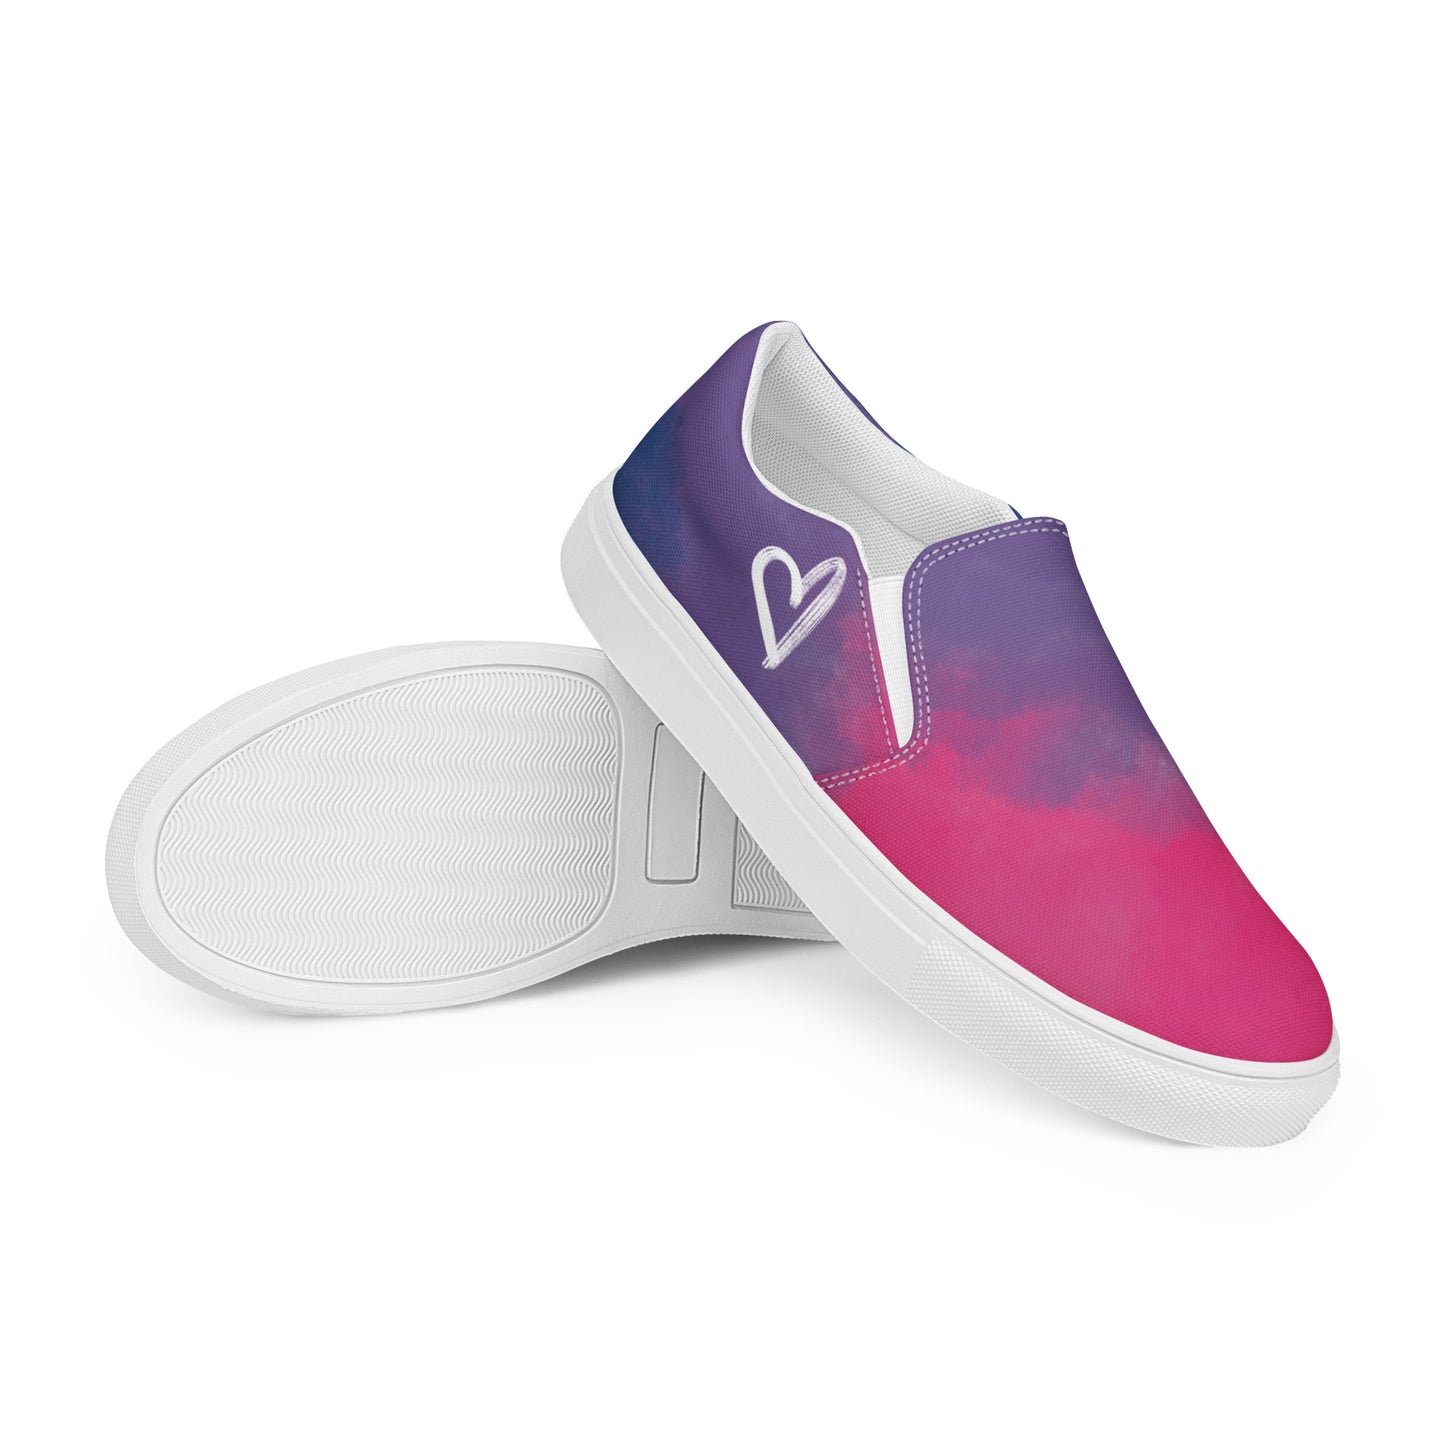 A pair of slip on shoes with color block pink, purple, and blue clouds, a white hand drawn heart, and the Aras Sivad logo on the back.